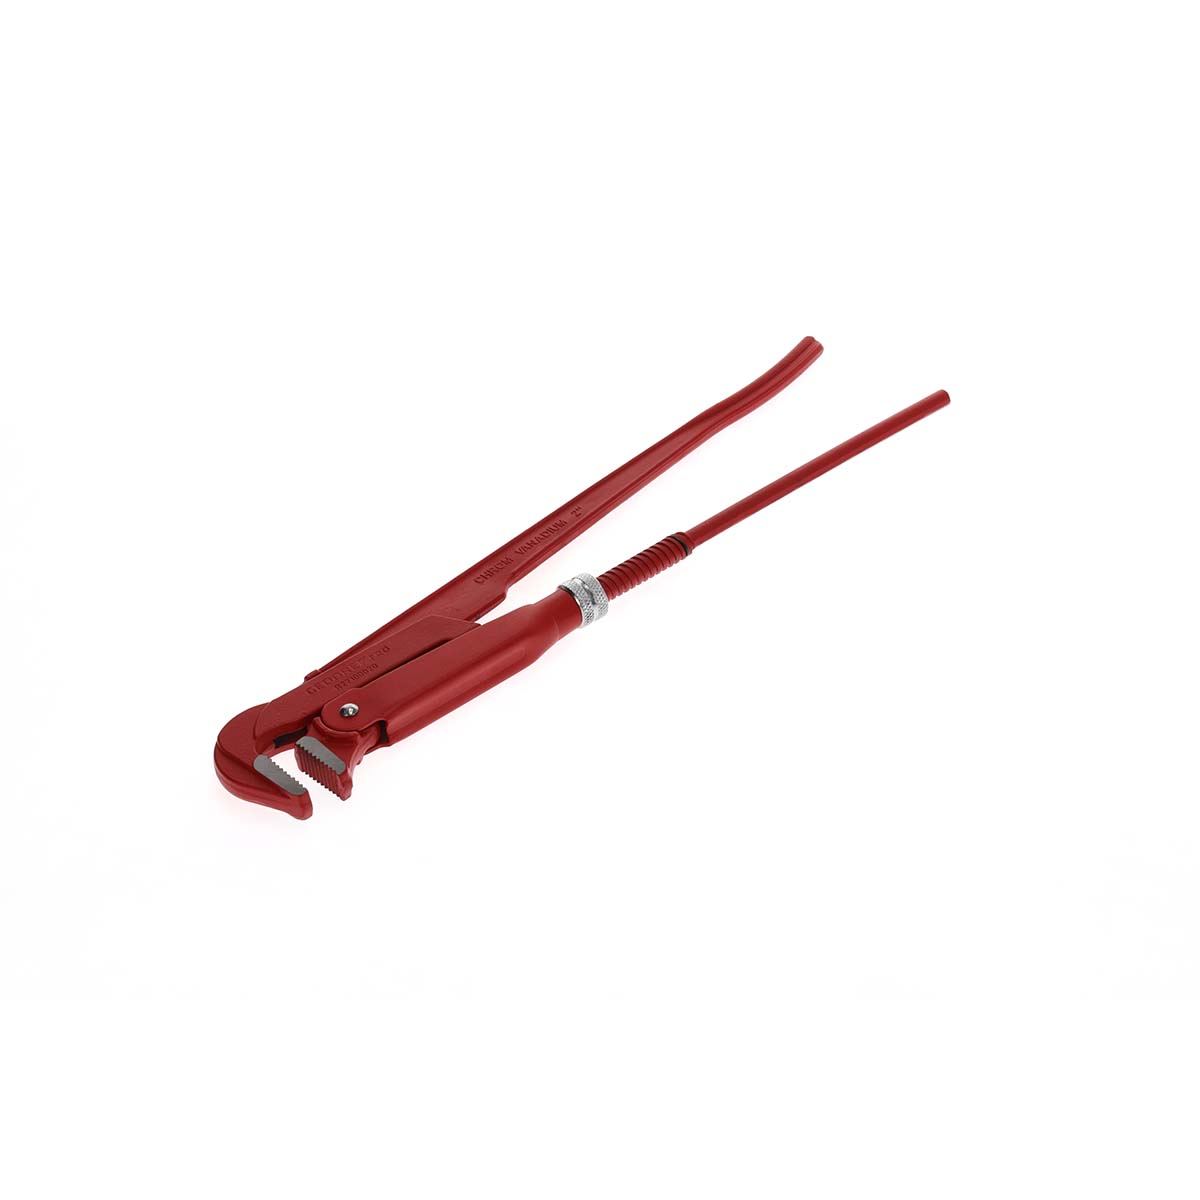 GEDORE rouge R27100020 - Pince à tube avec embouchure 90°, 555mm (3301159)